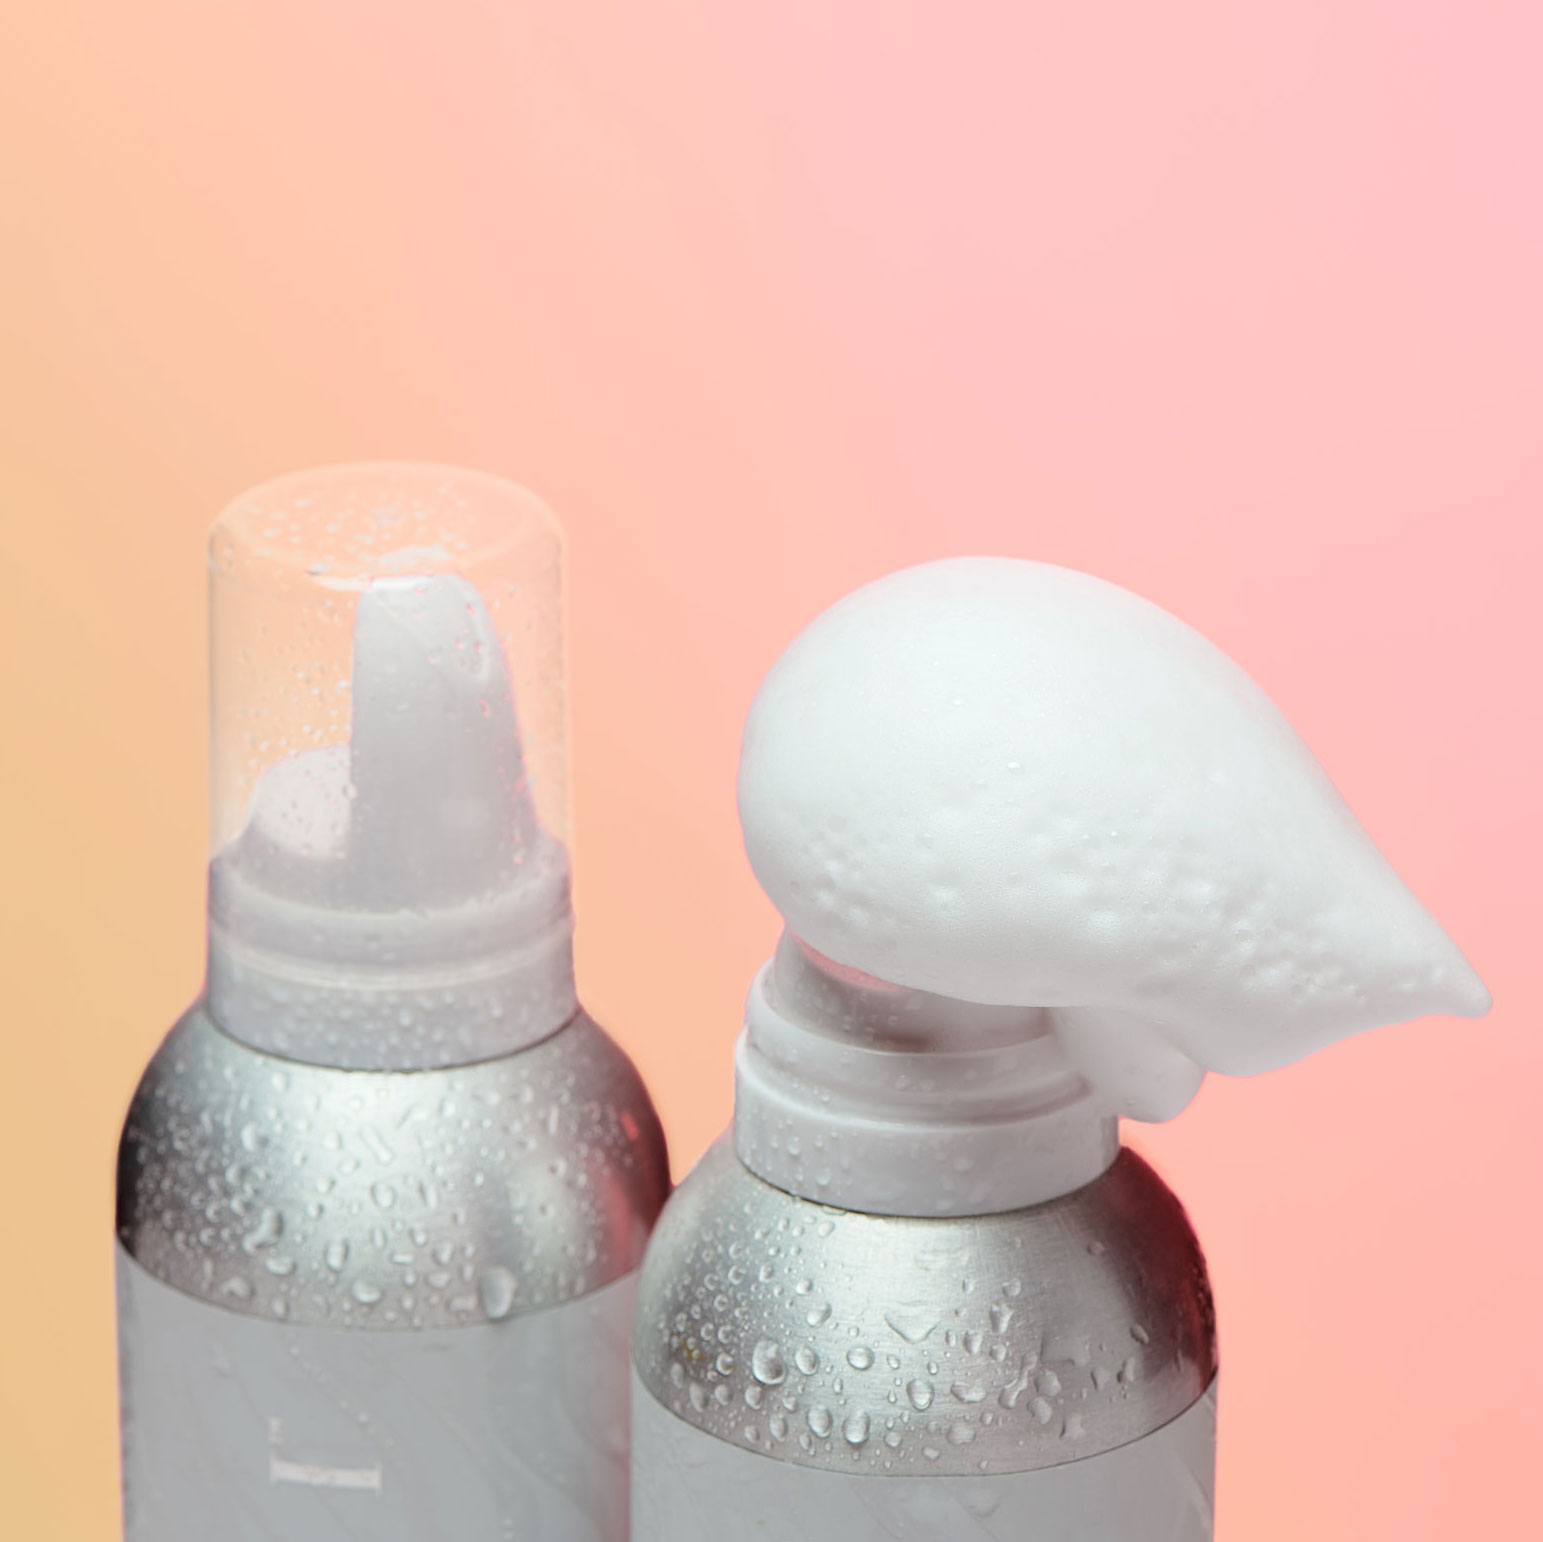 Two volumizing mousse products including one with mousse coming out of its container